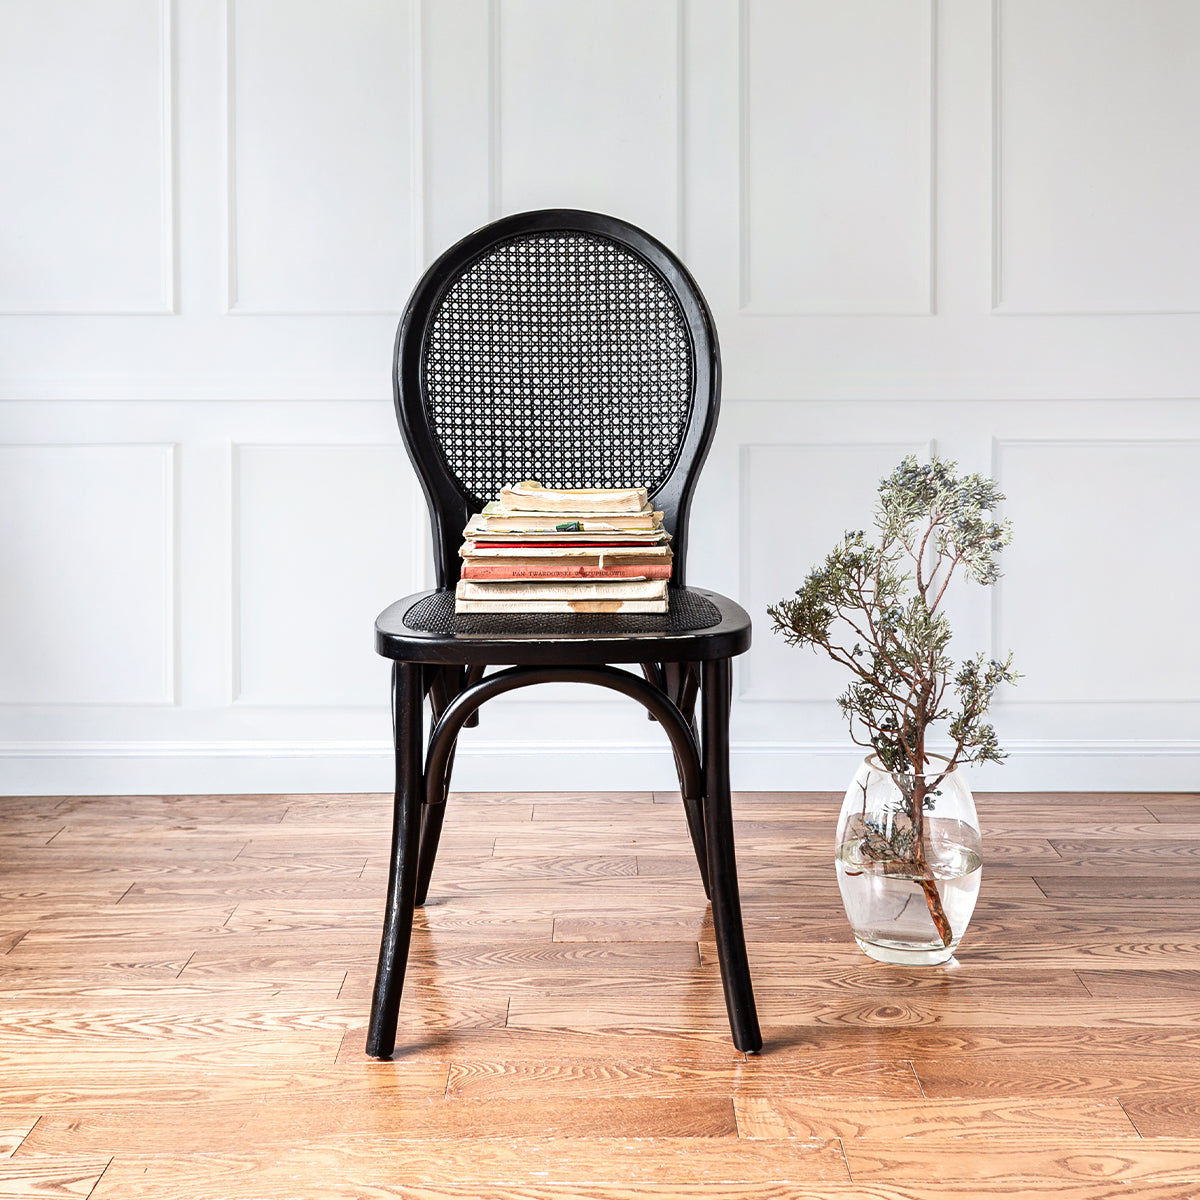 Black painted dining chair with rattan back on wood floors